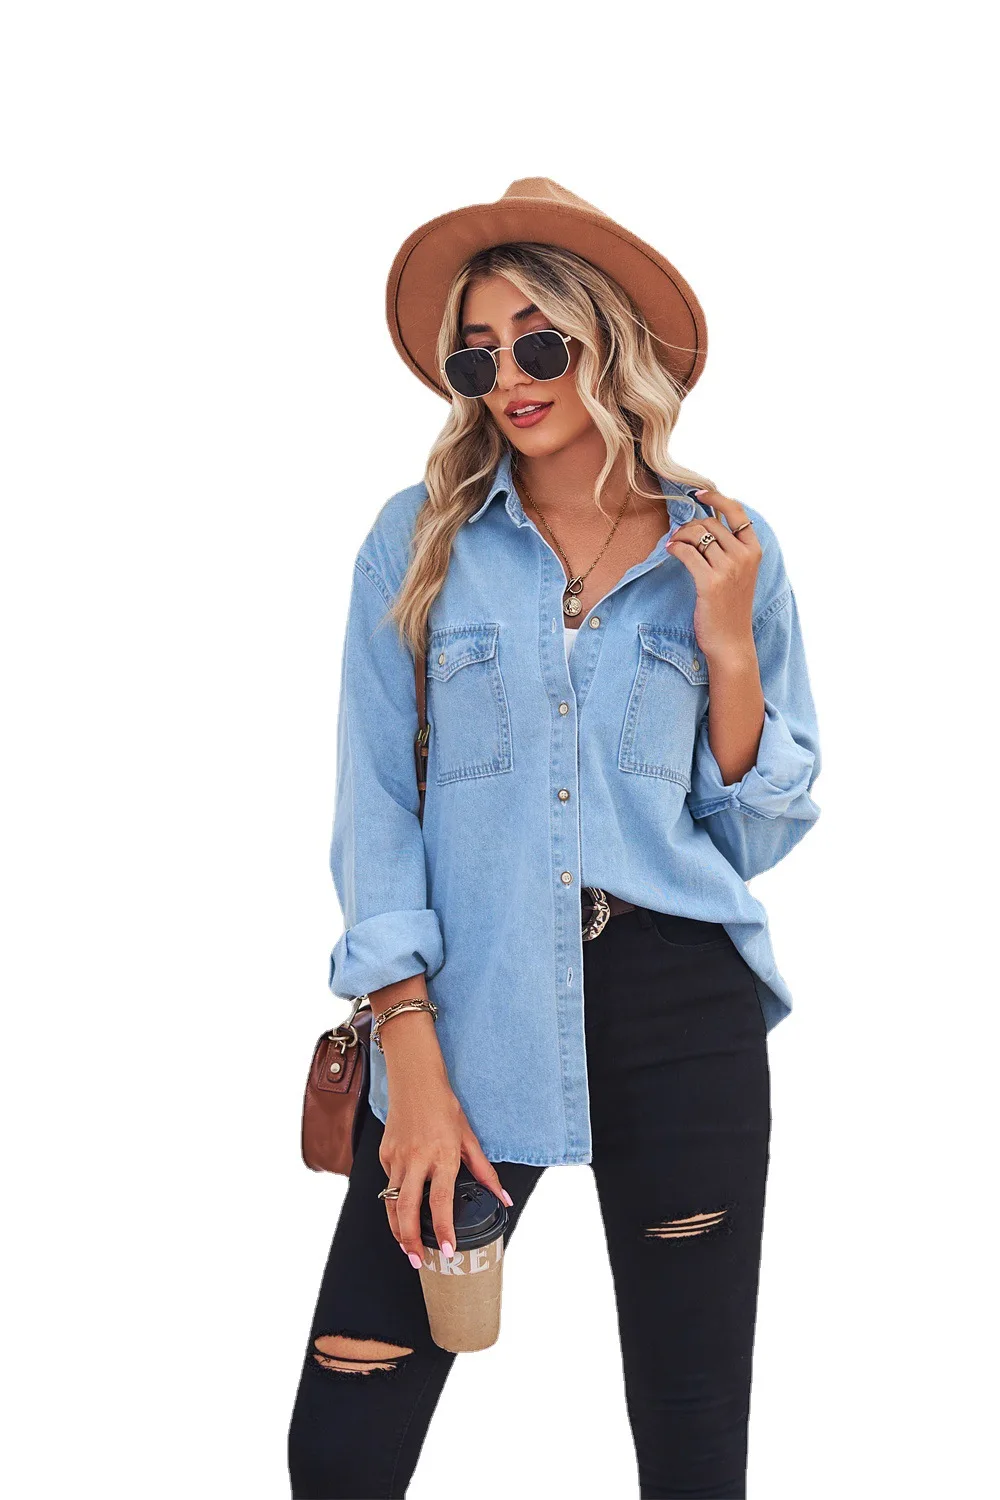 

2023 Fall/Winter New Fashion Denim Shirts For Women Slim Fit Long Sleeve Thin Jeans Coat Casual Female Clothing S-XL Drop Ship